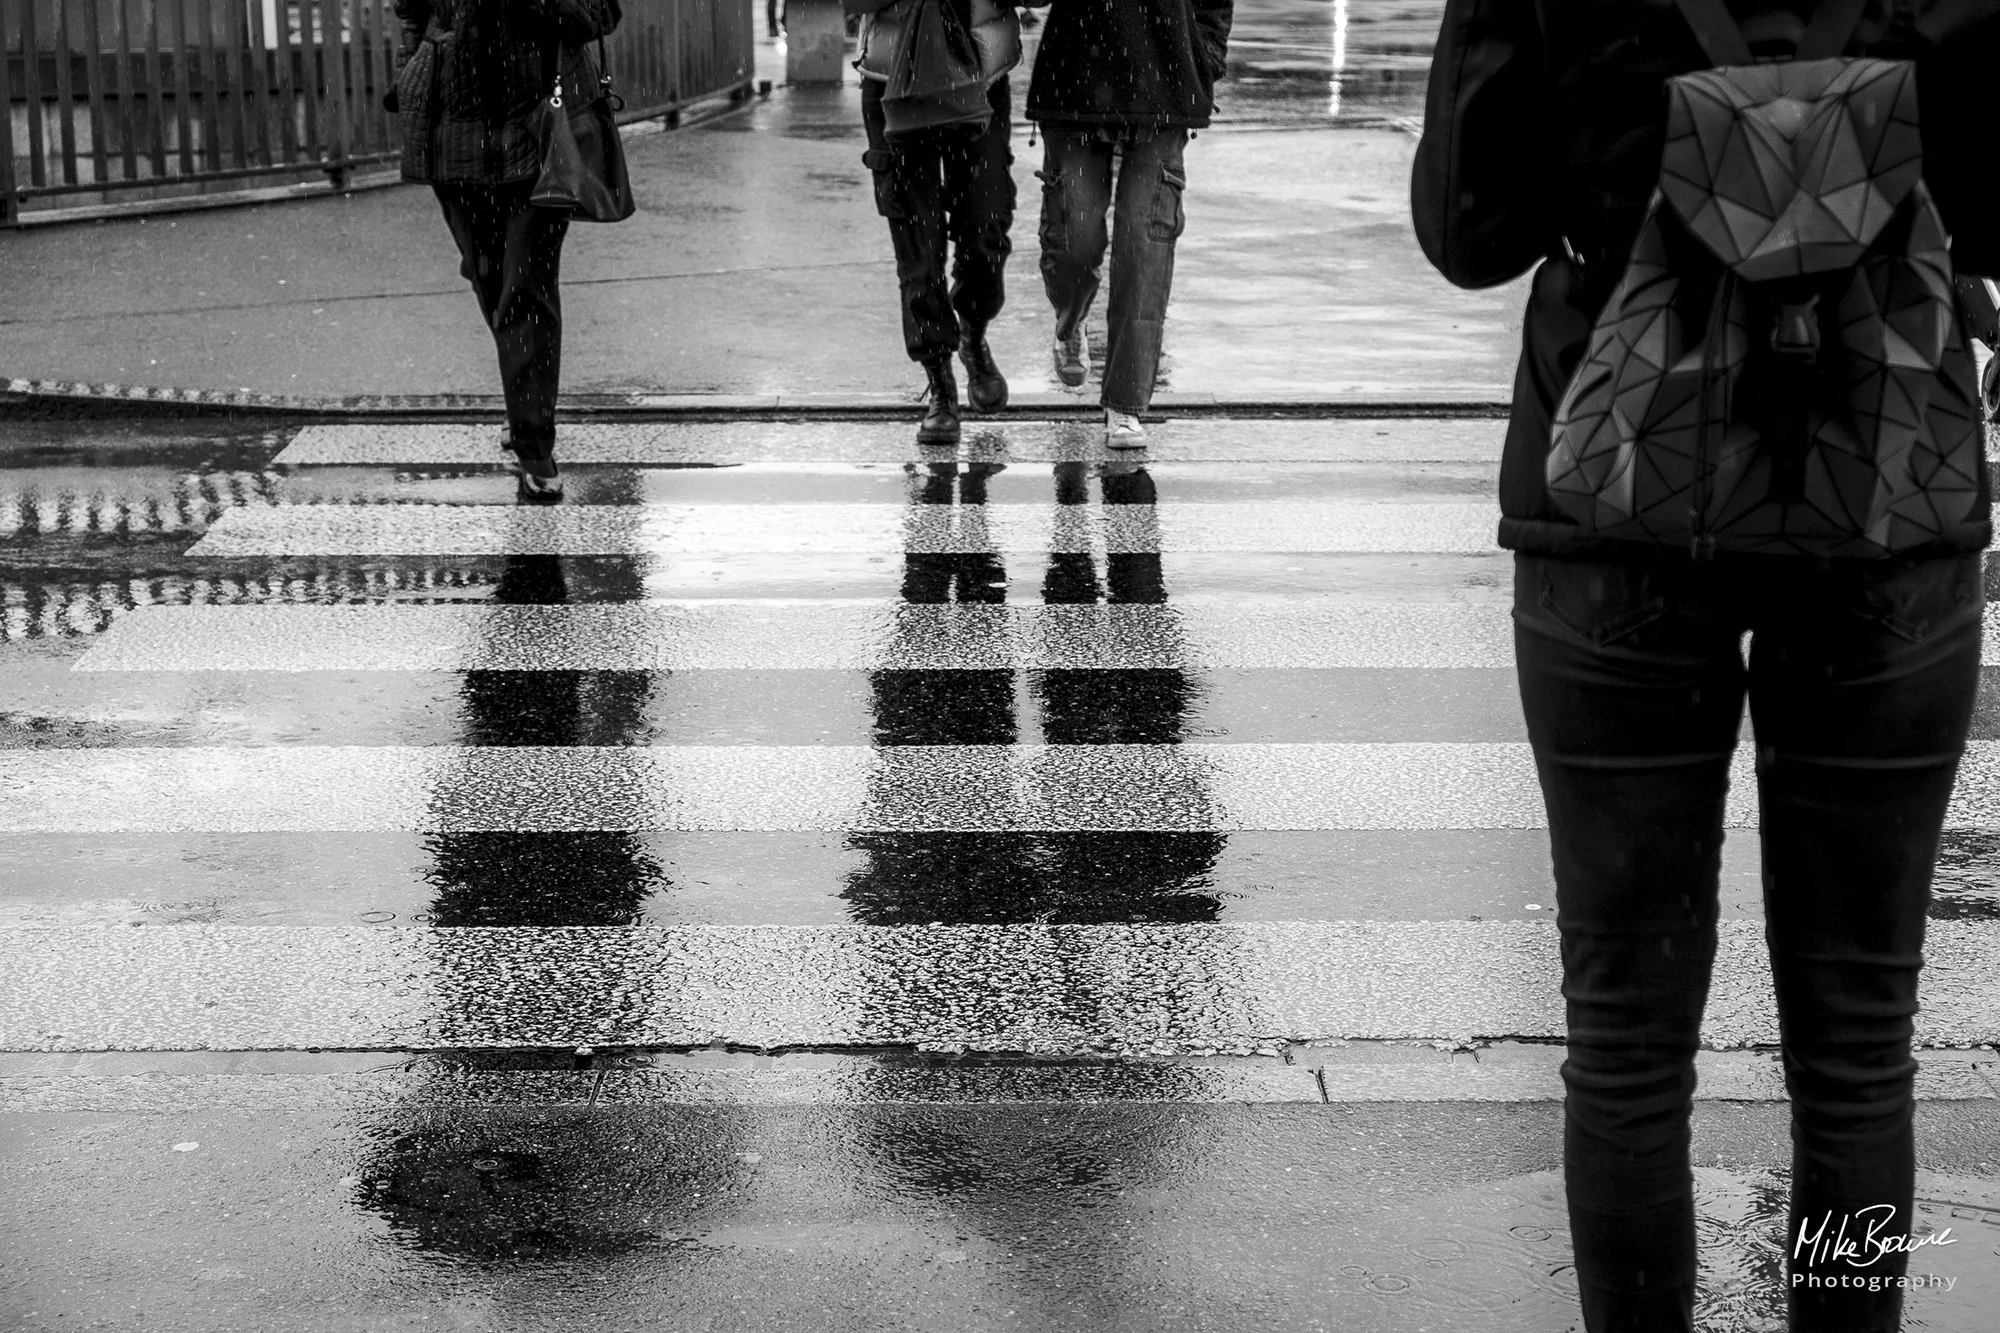 Reflection on a wet road of of three people at a pedestrian crossing